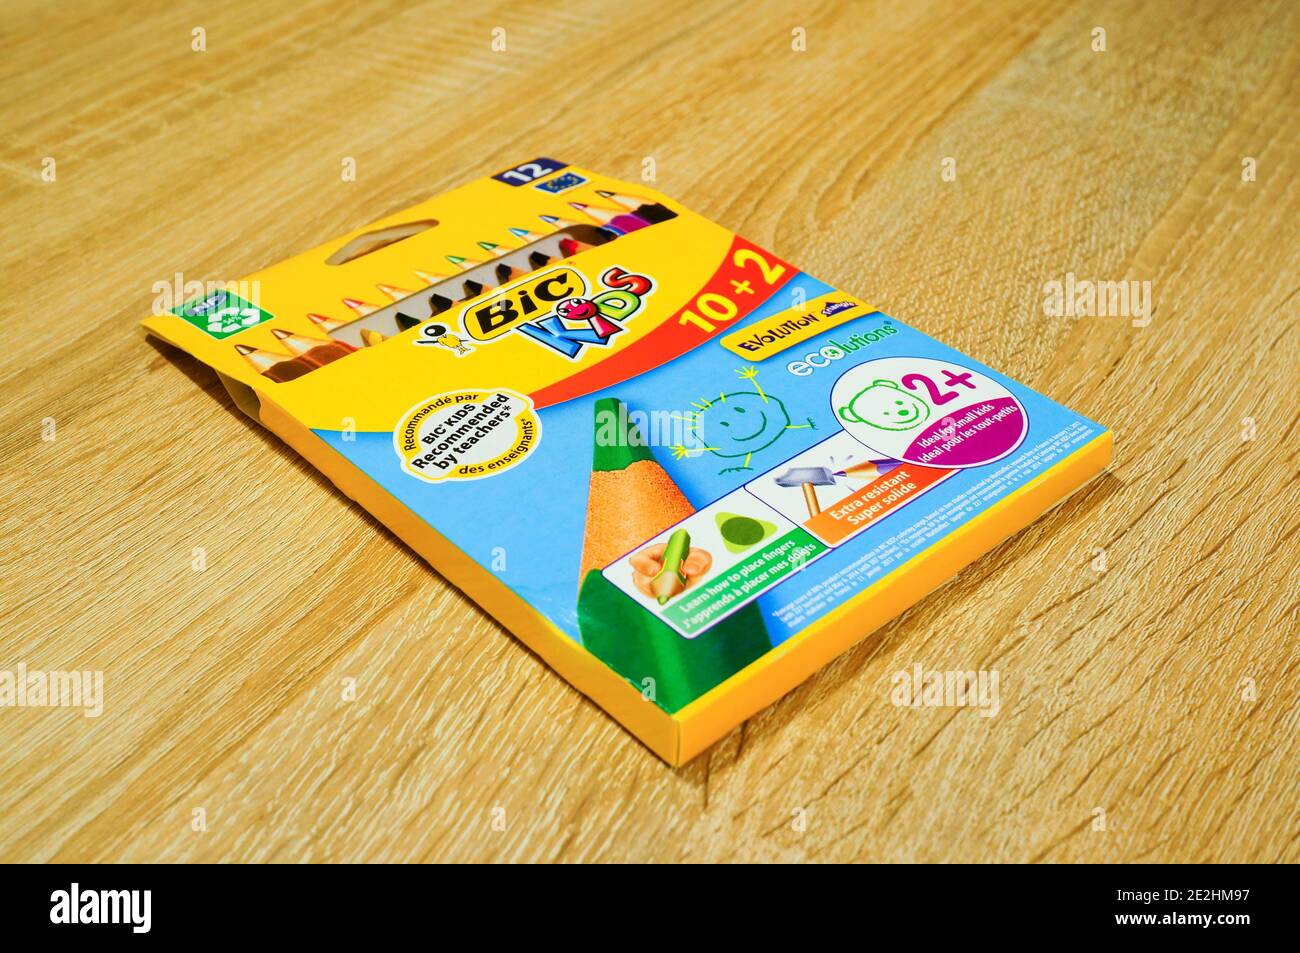 POZNAN, POLAND - Jan 13, 2021: Bic Kids drawing pencils in a box on wooden  table Stock Photo - Alamy